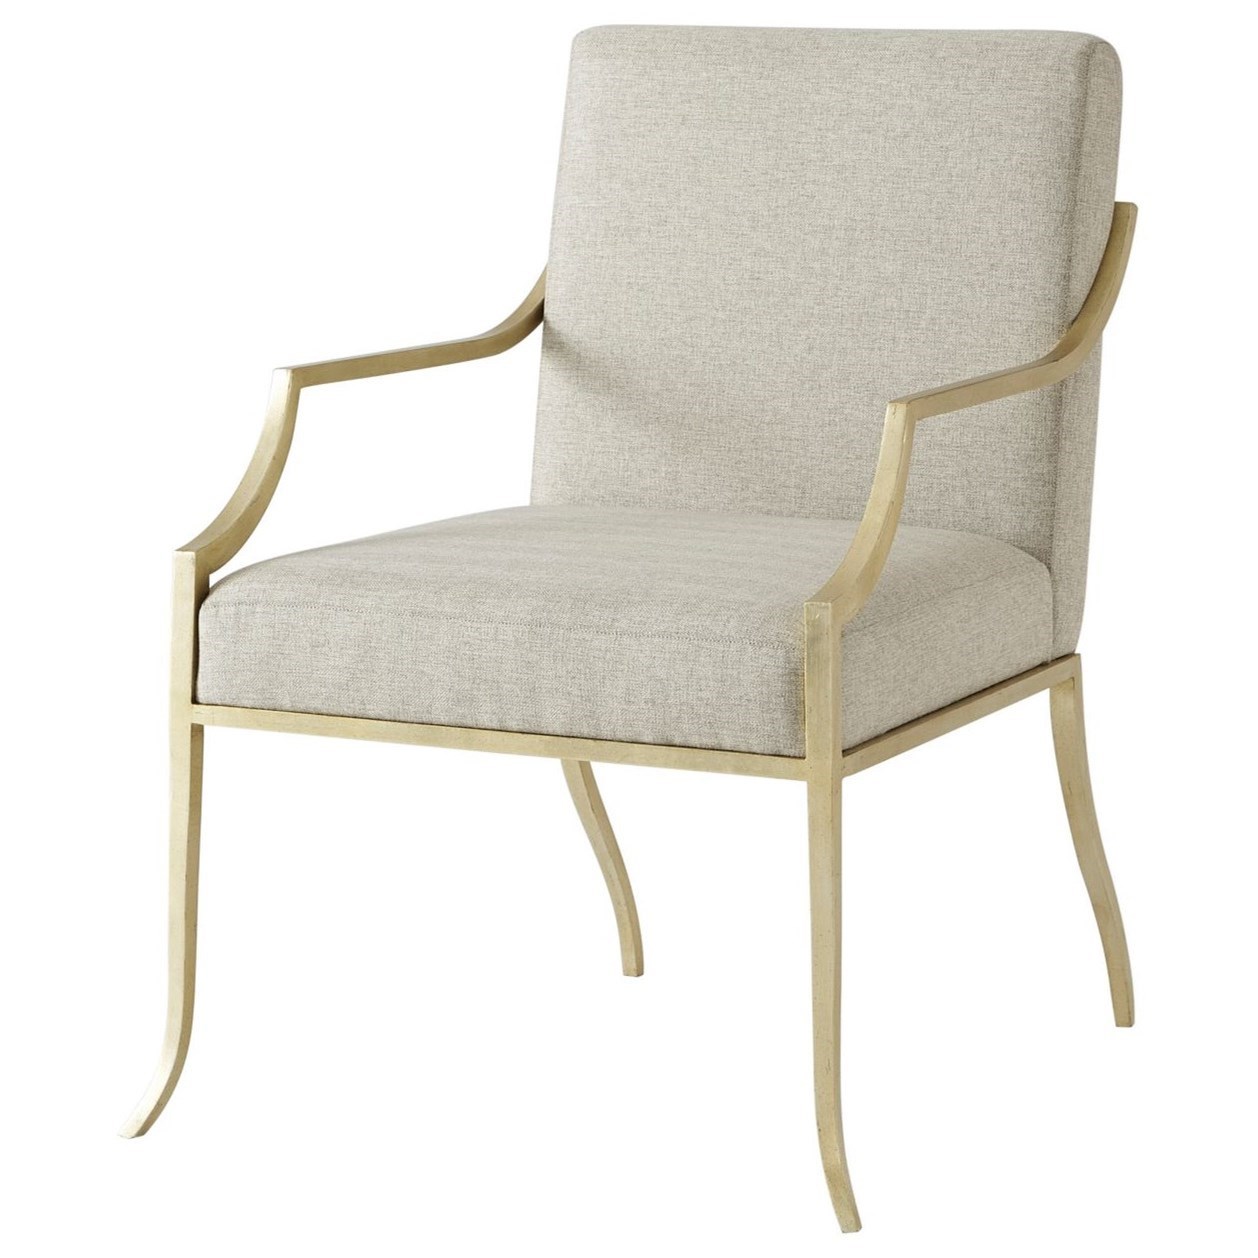 Larissa Accent Chair with Gold Leaf Steel Frame